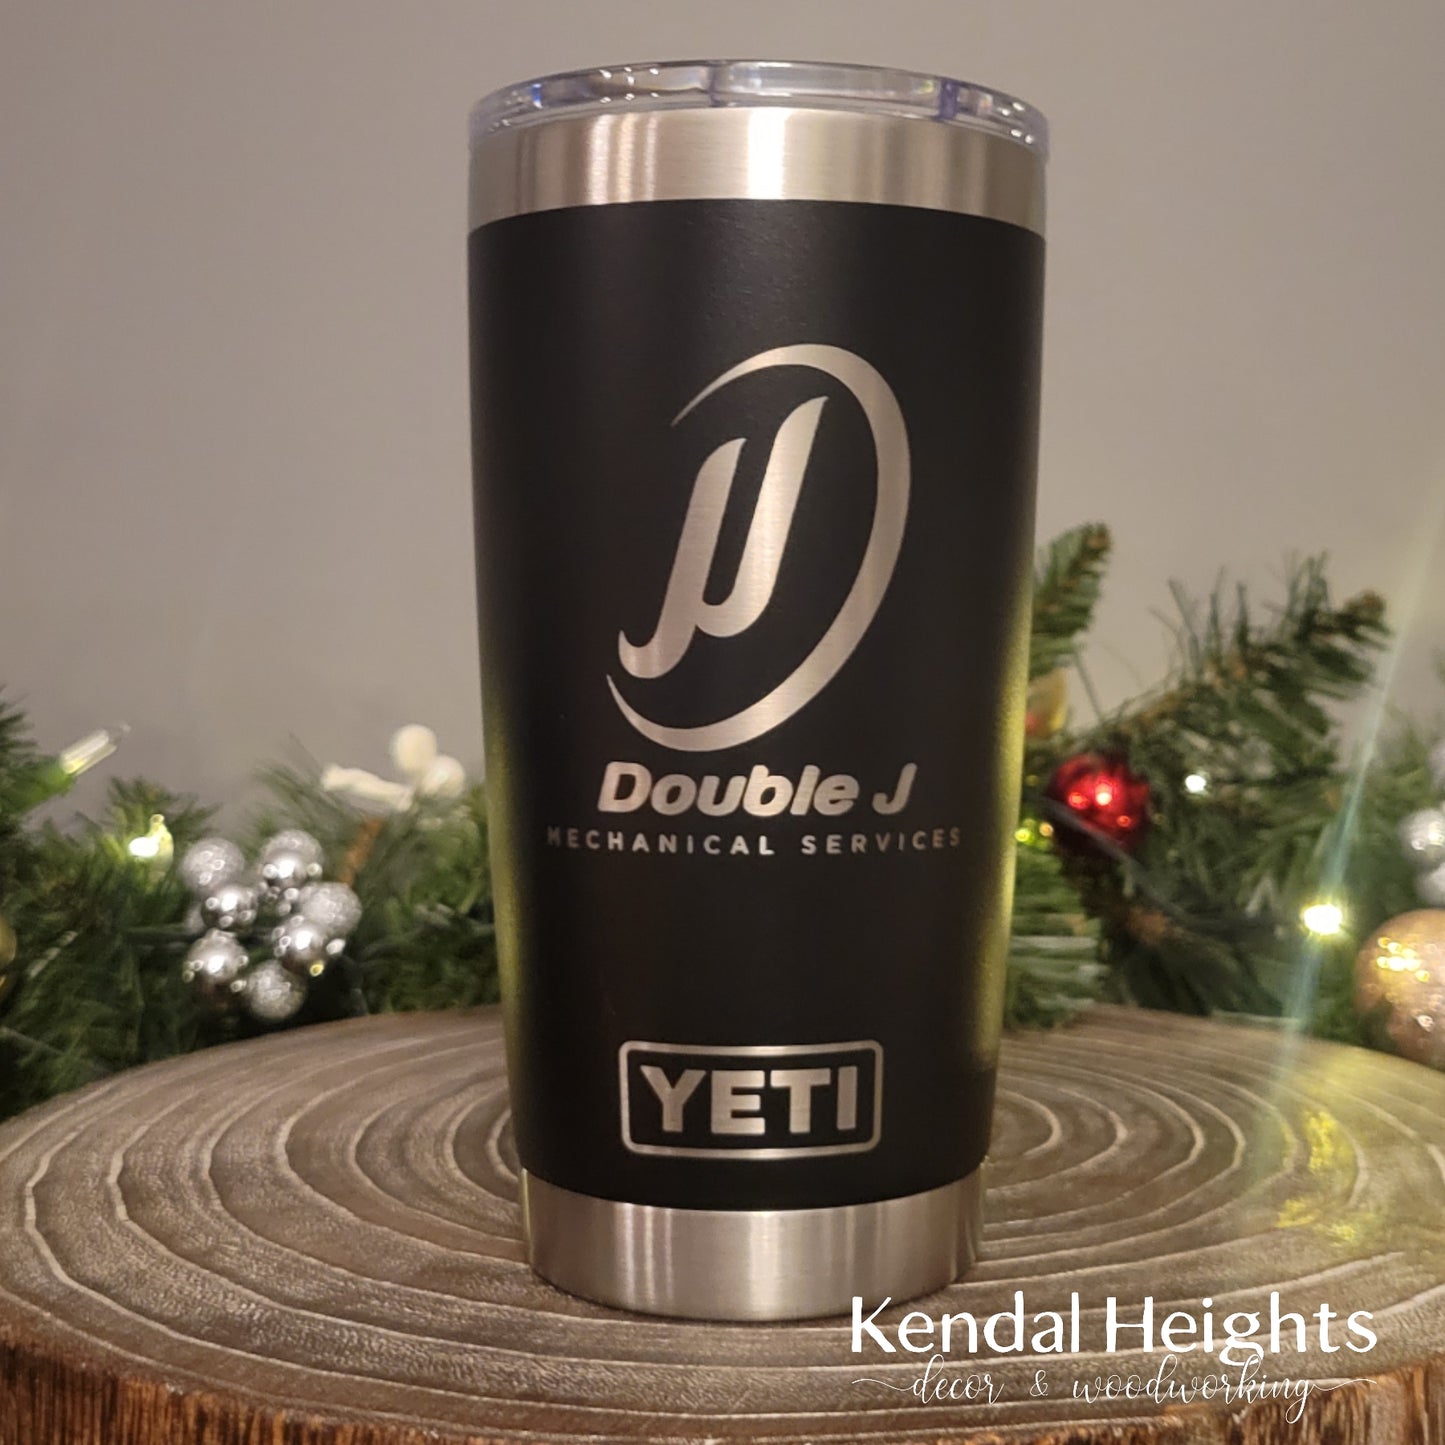 Business Tumblers - Cooperate / Wholesale